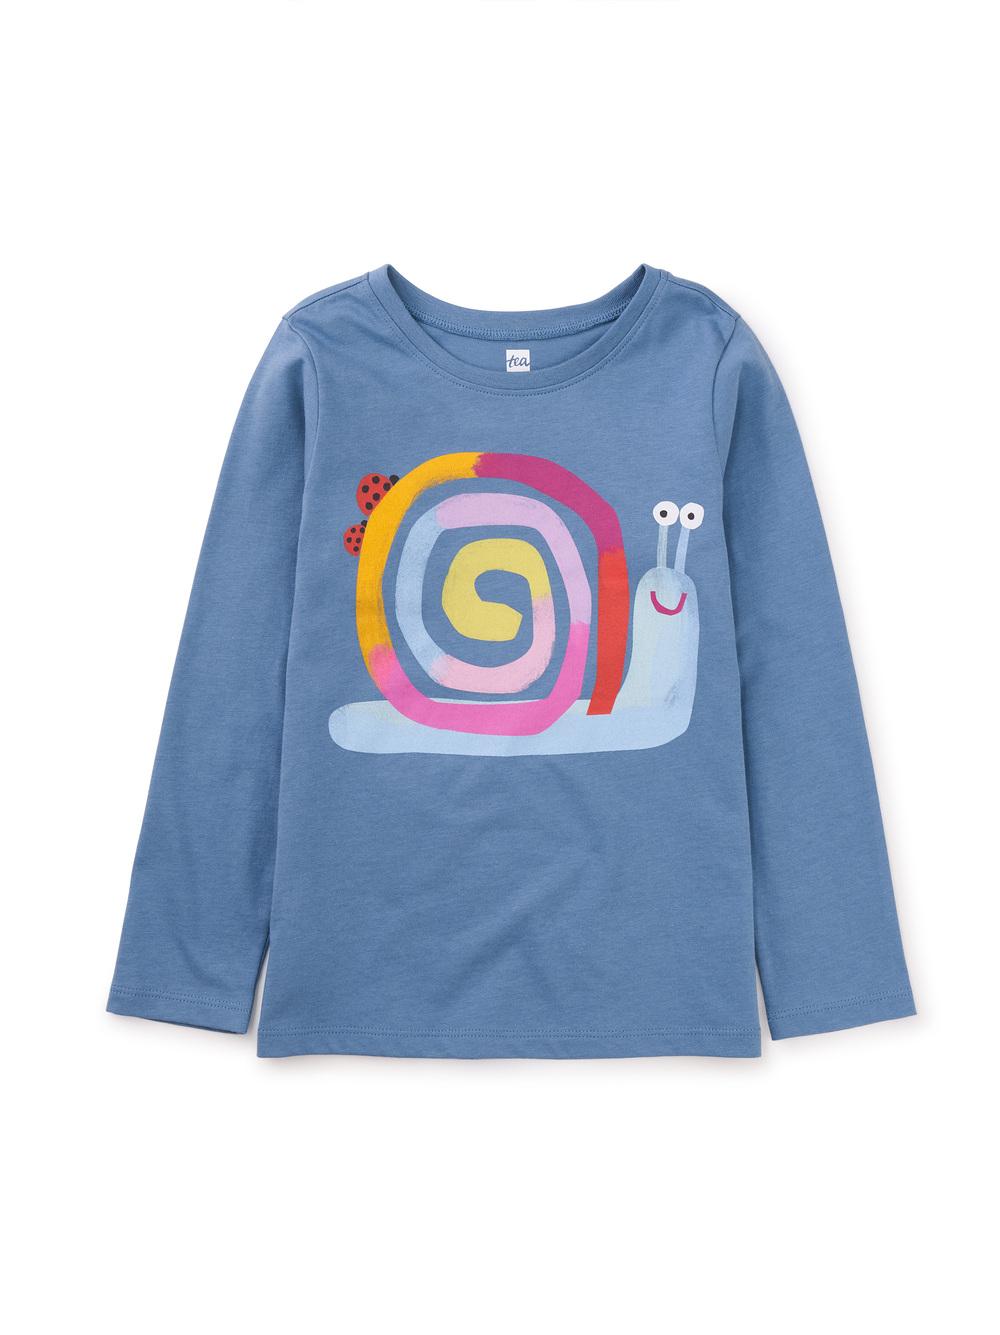 Snail Graphic Tee